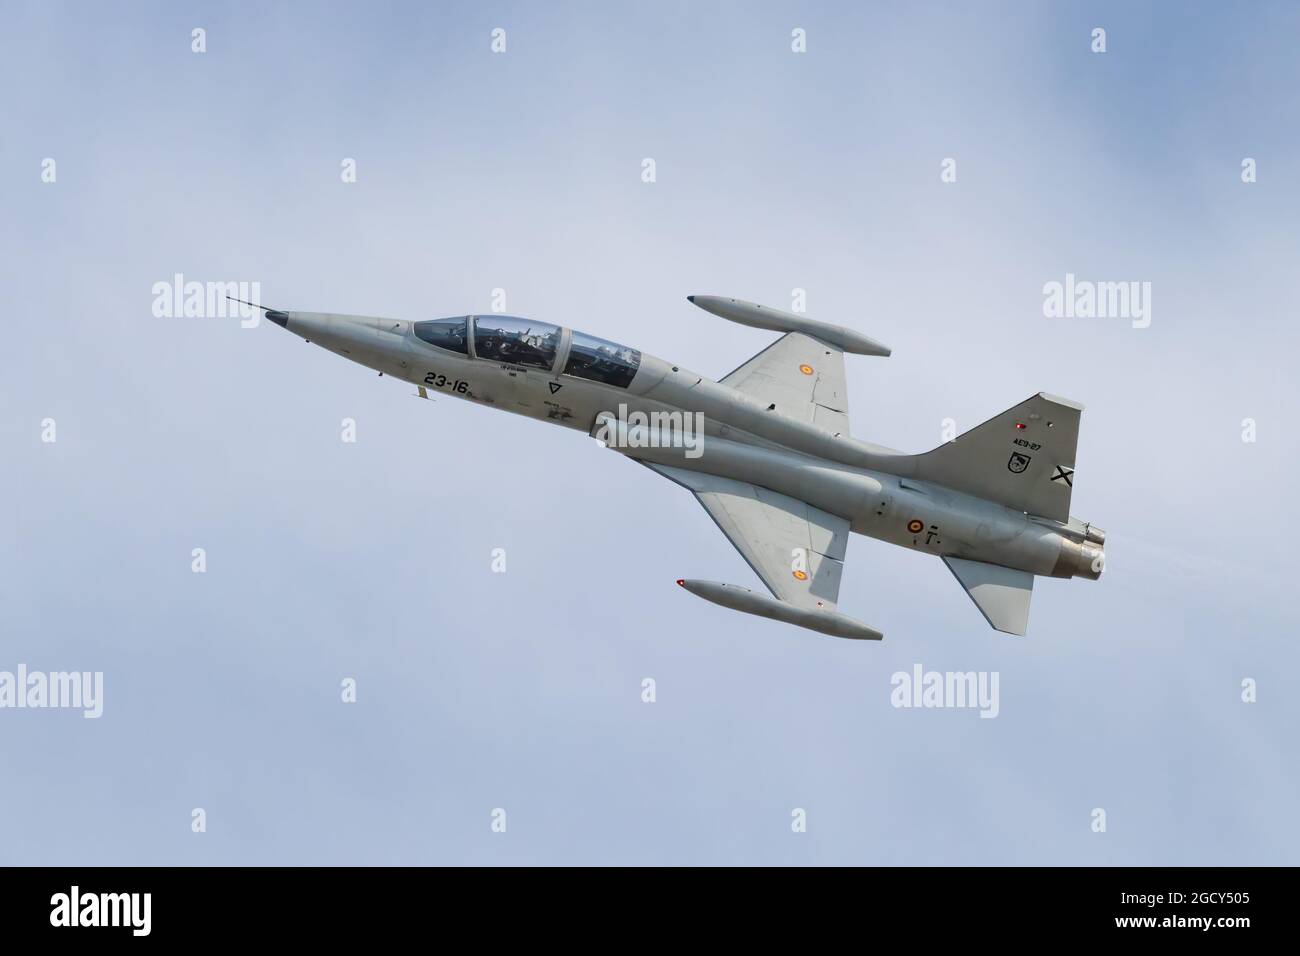 Seville, Spain - July 7, 2020: Northrop F-5M Freedom Fighter (AE-9) from 23 wing, Spanish Air Force Fighter jet plane on display in Seville, Spain Stock Photo